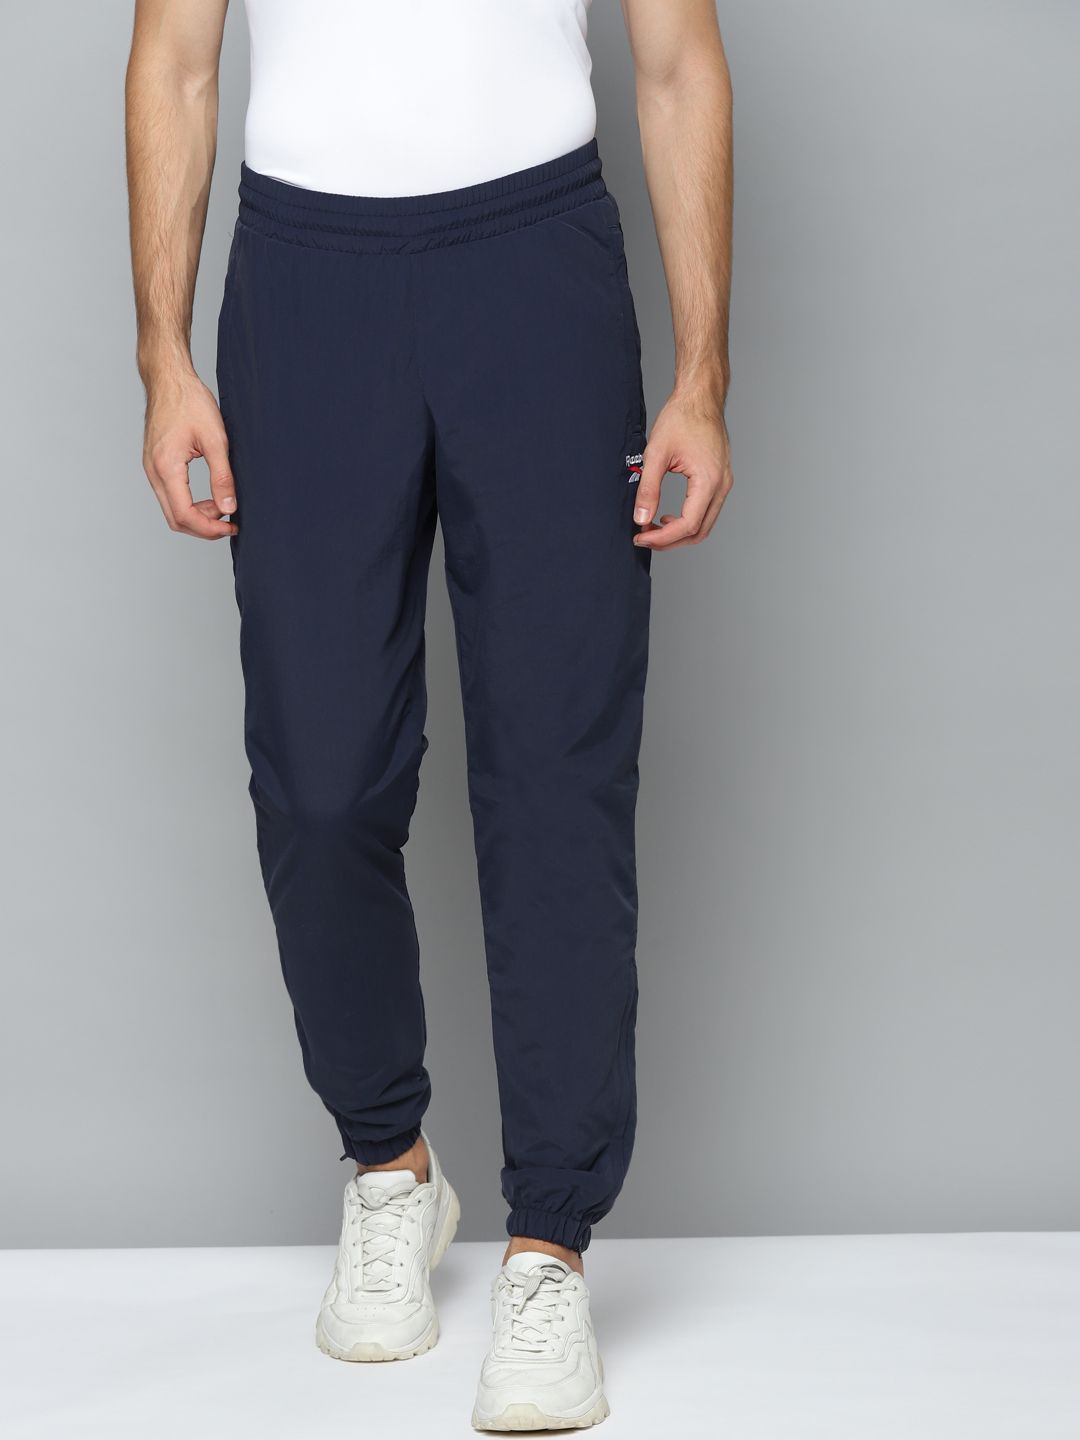 Reebok Classic Unisex Navy Blue Solid V FR Joggers Price in India